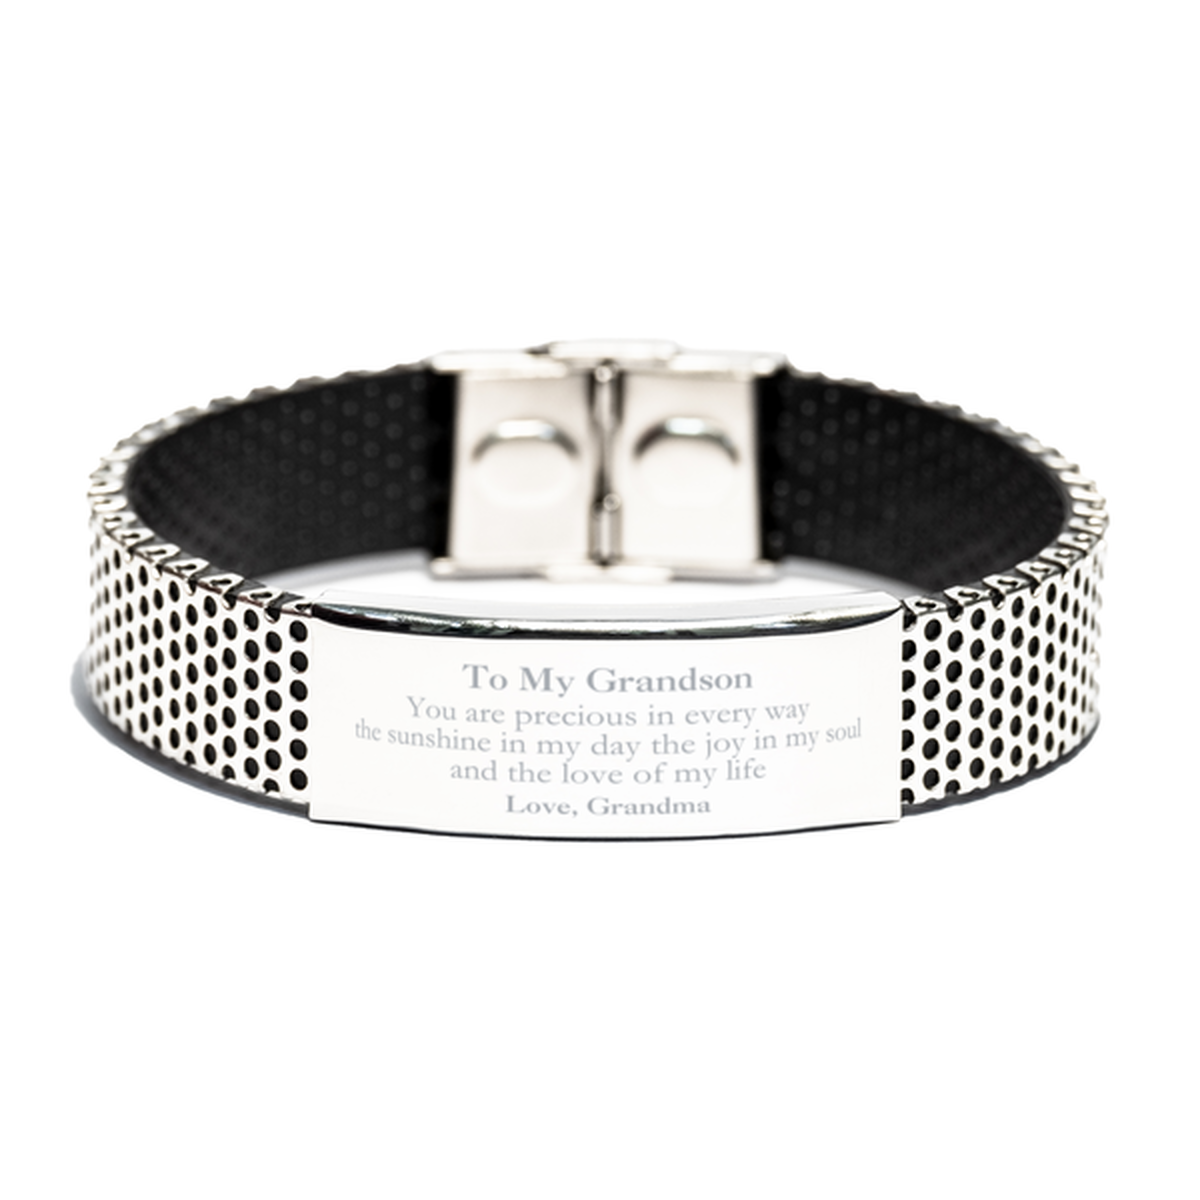 Graduation Gifts for Grandson Stainless Steel Bracelet Present from Grandma, Christmas Grandson Birthday Gifts Grandson You are precious in every way the sunshine in my day. Love, Grandma